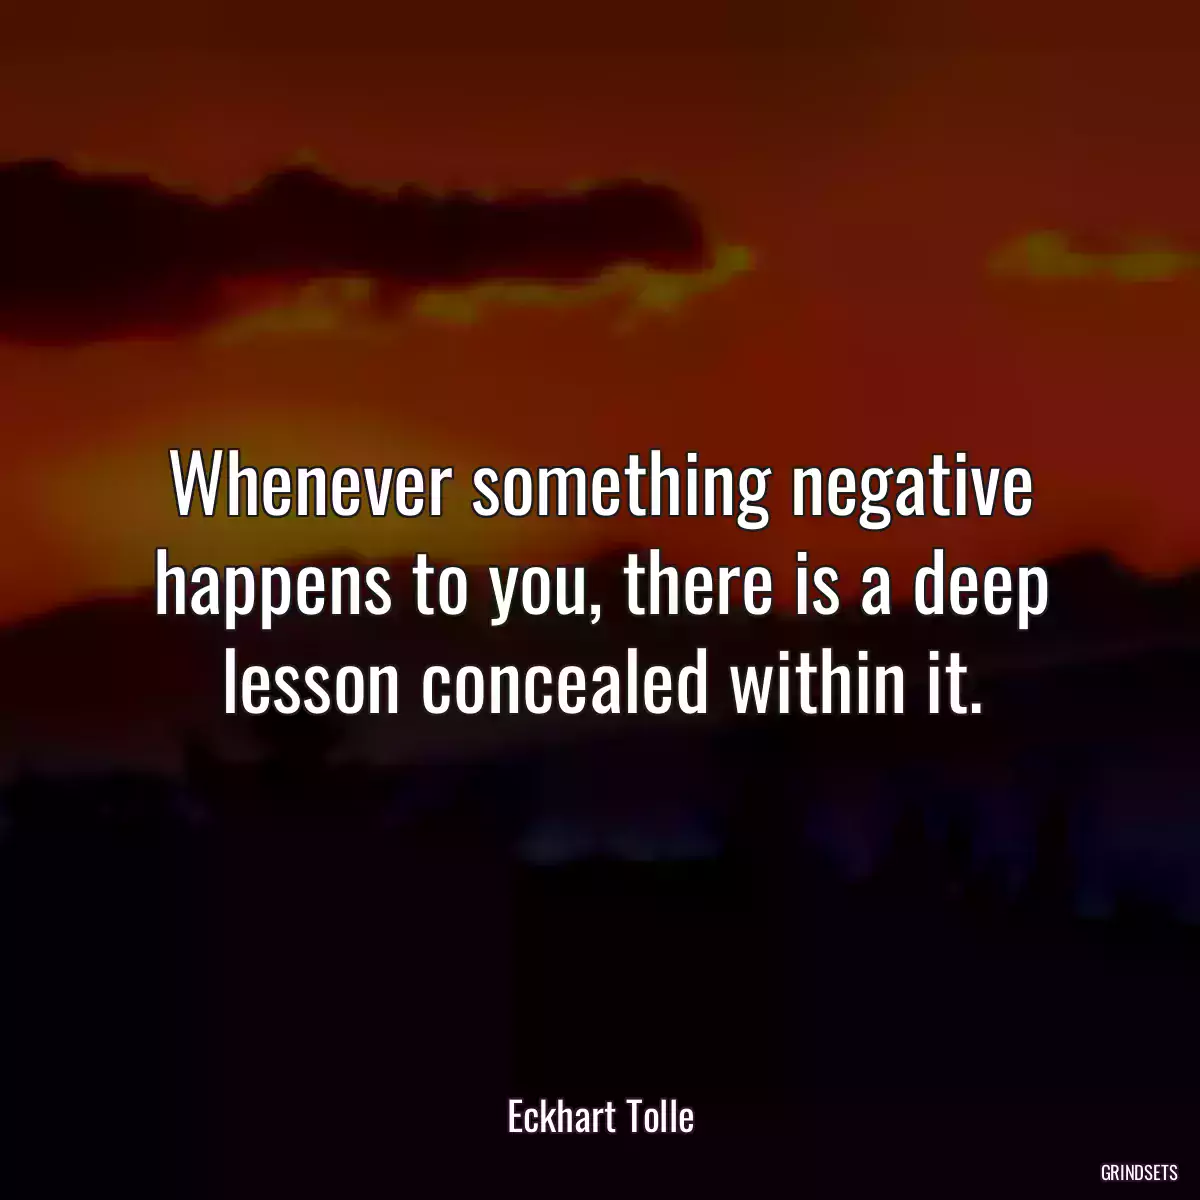 Whenever something negative happens to you, there is a deep lesson concealed within it.